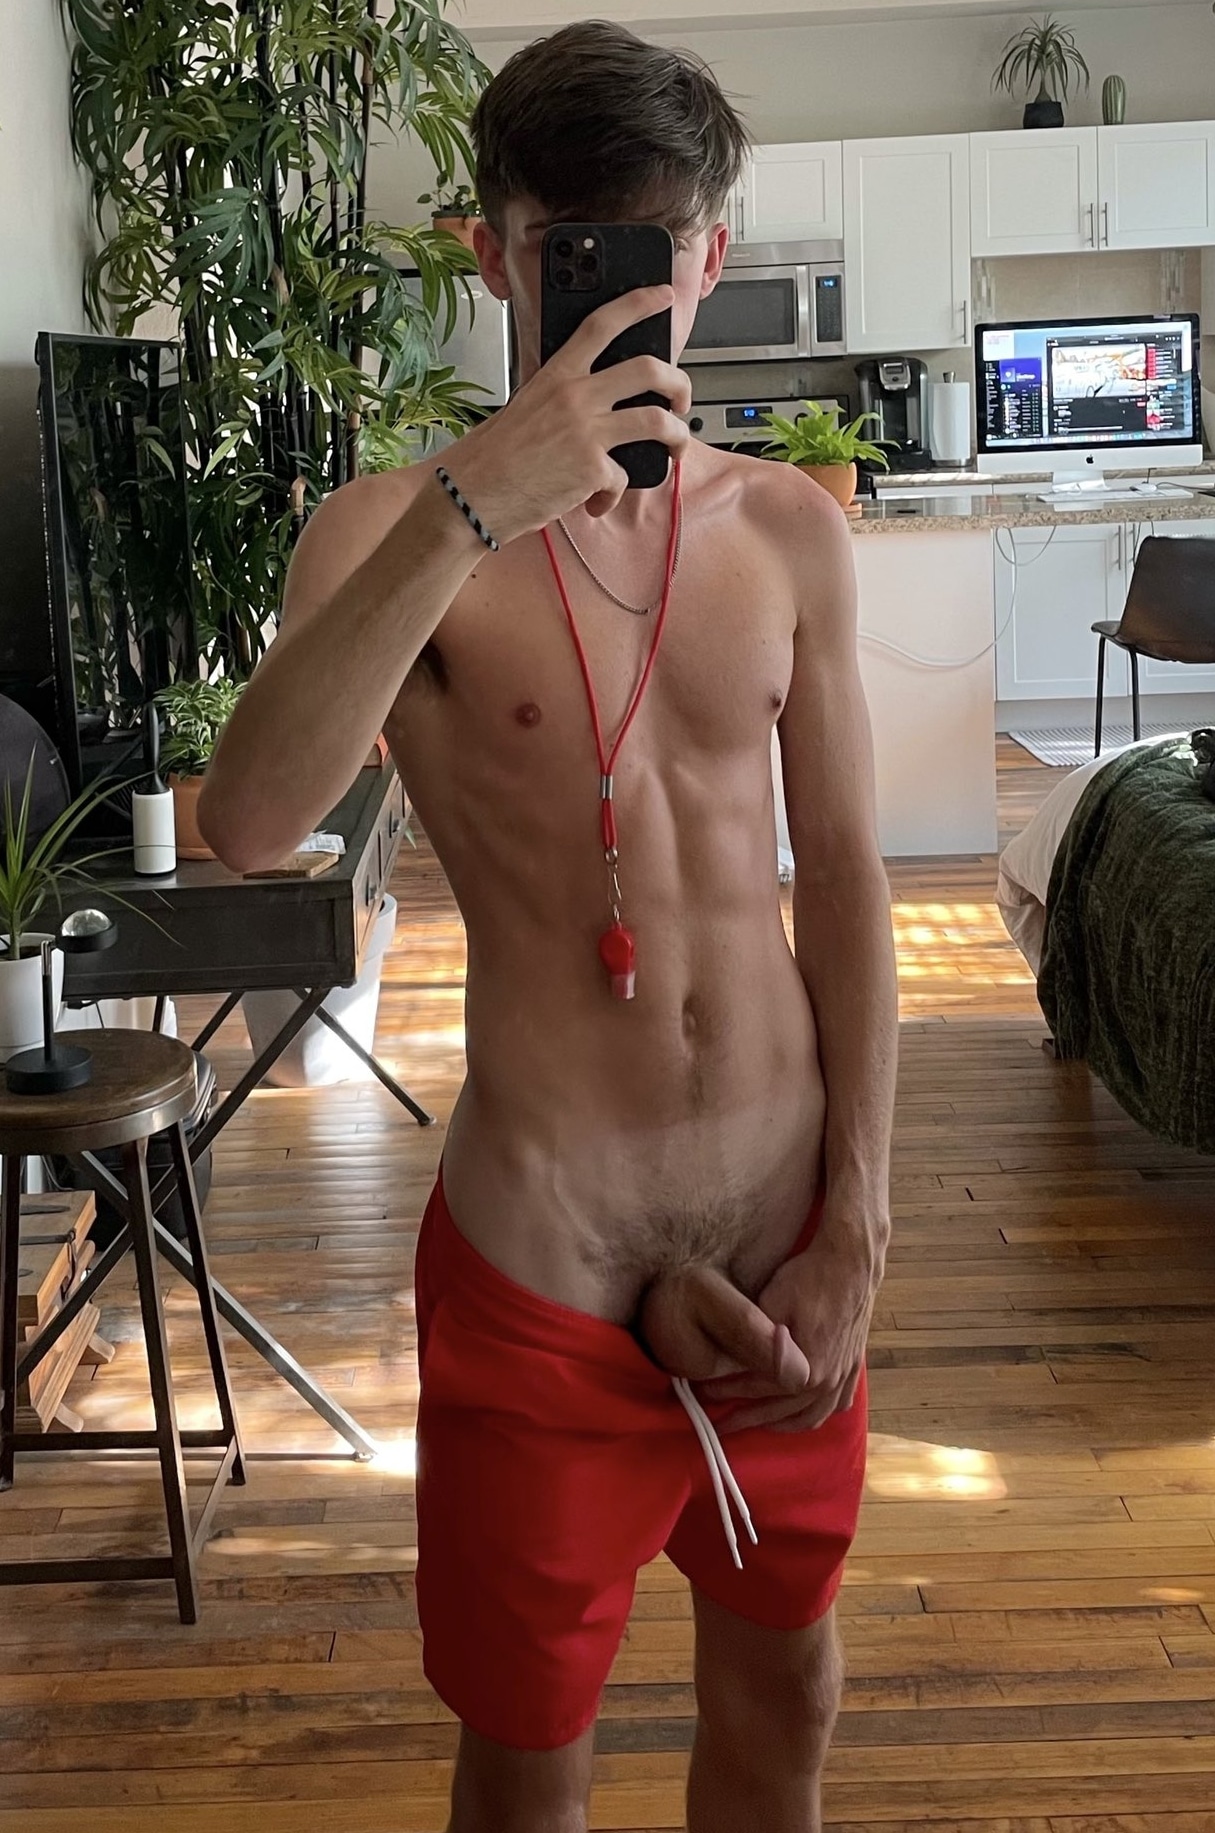 Boy showing his dick